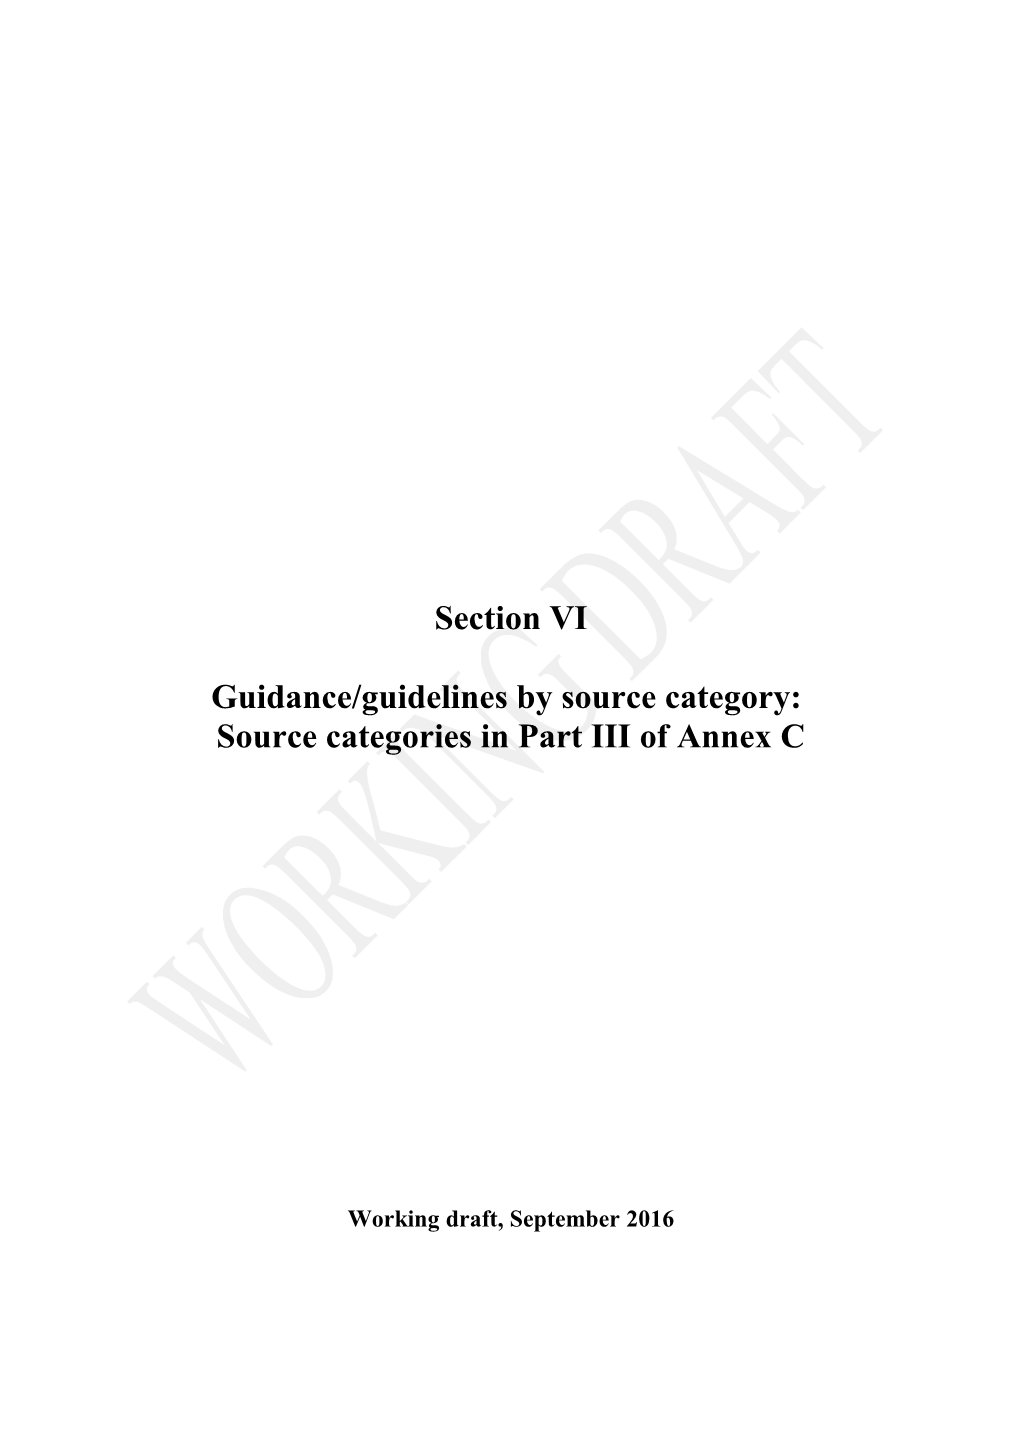 Section VI Guidance/Guidelines by Source Category: Source Categories in Part III of Annex C